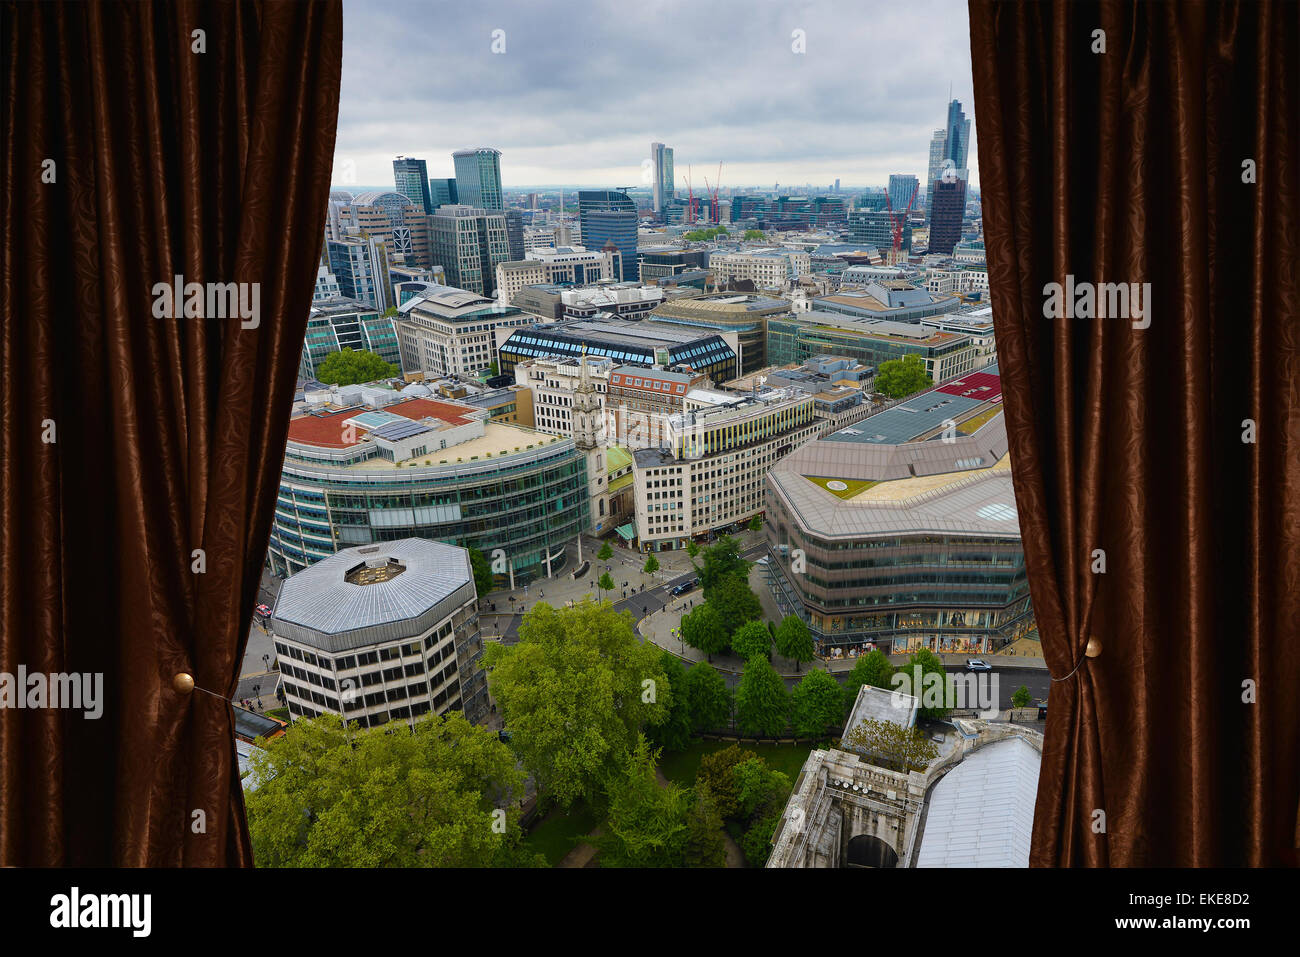 City view behind brown curtain Stock Photo